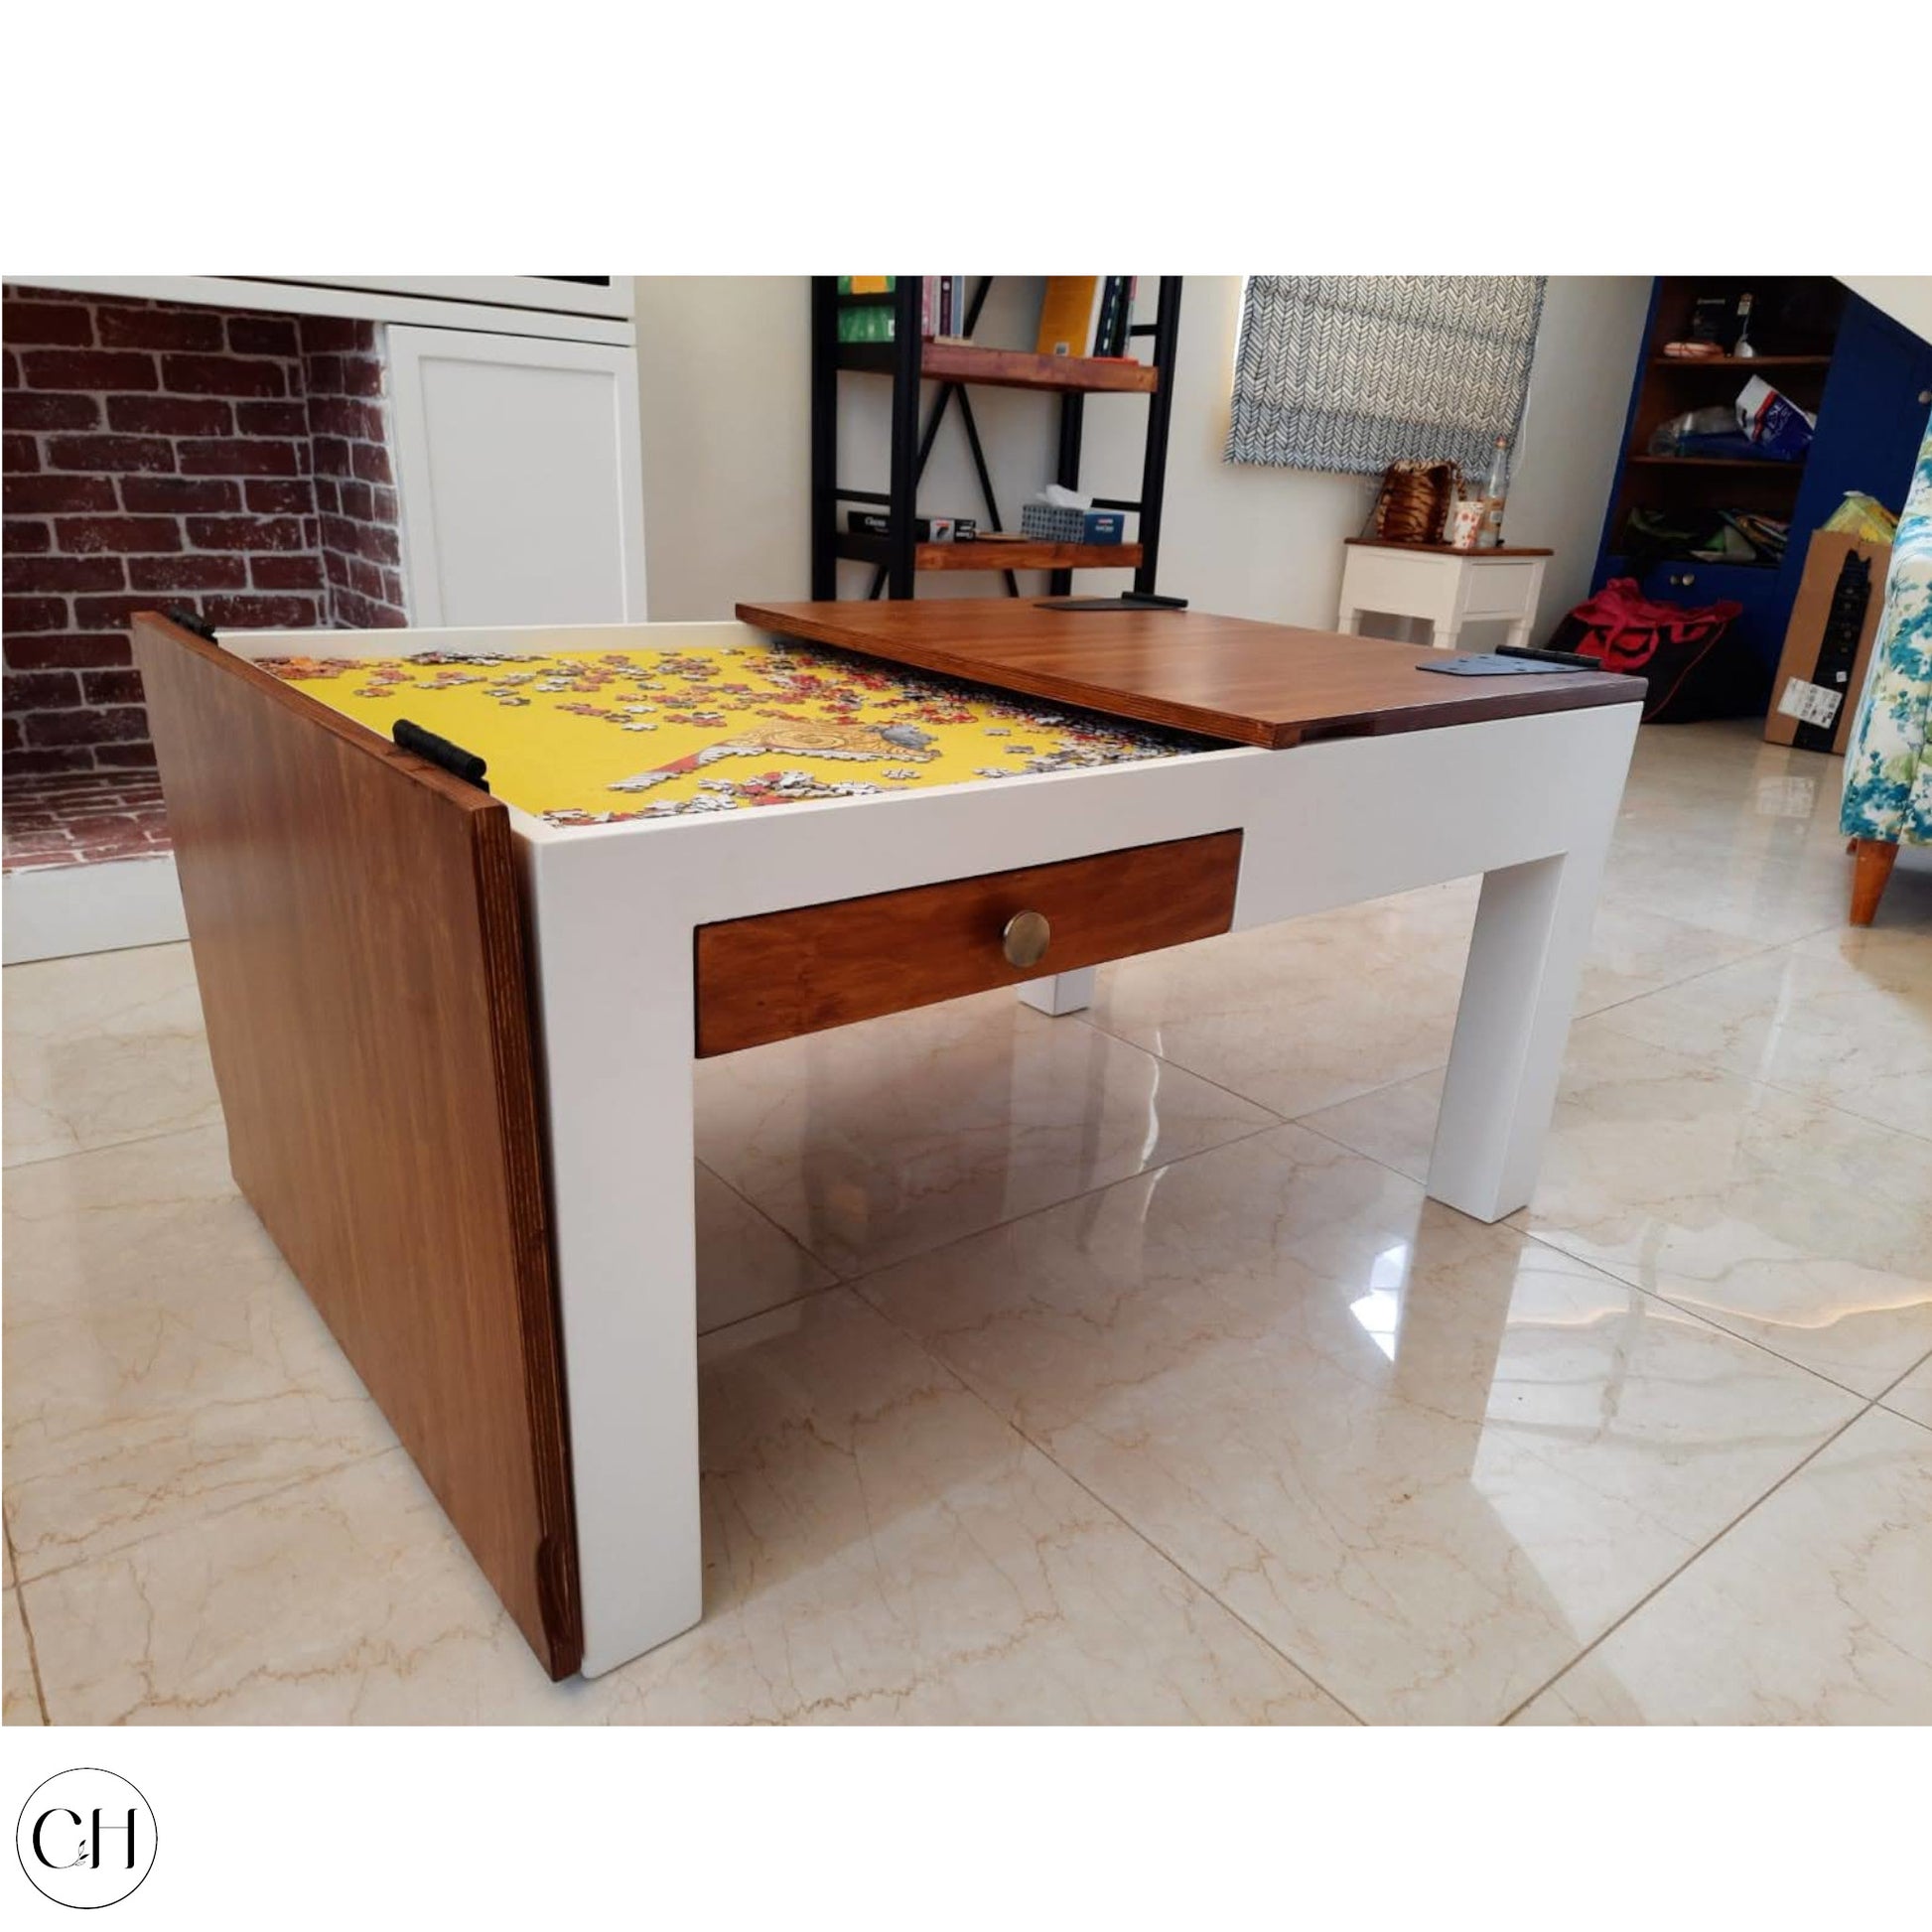 CustHum-Spilsbury-coffee table with folding top to store jigsaw puzzle, small drawer (ISO, half open)